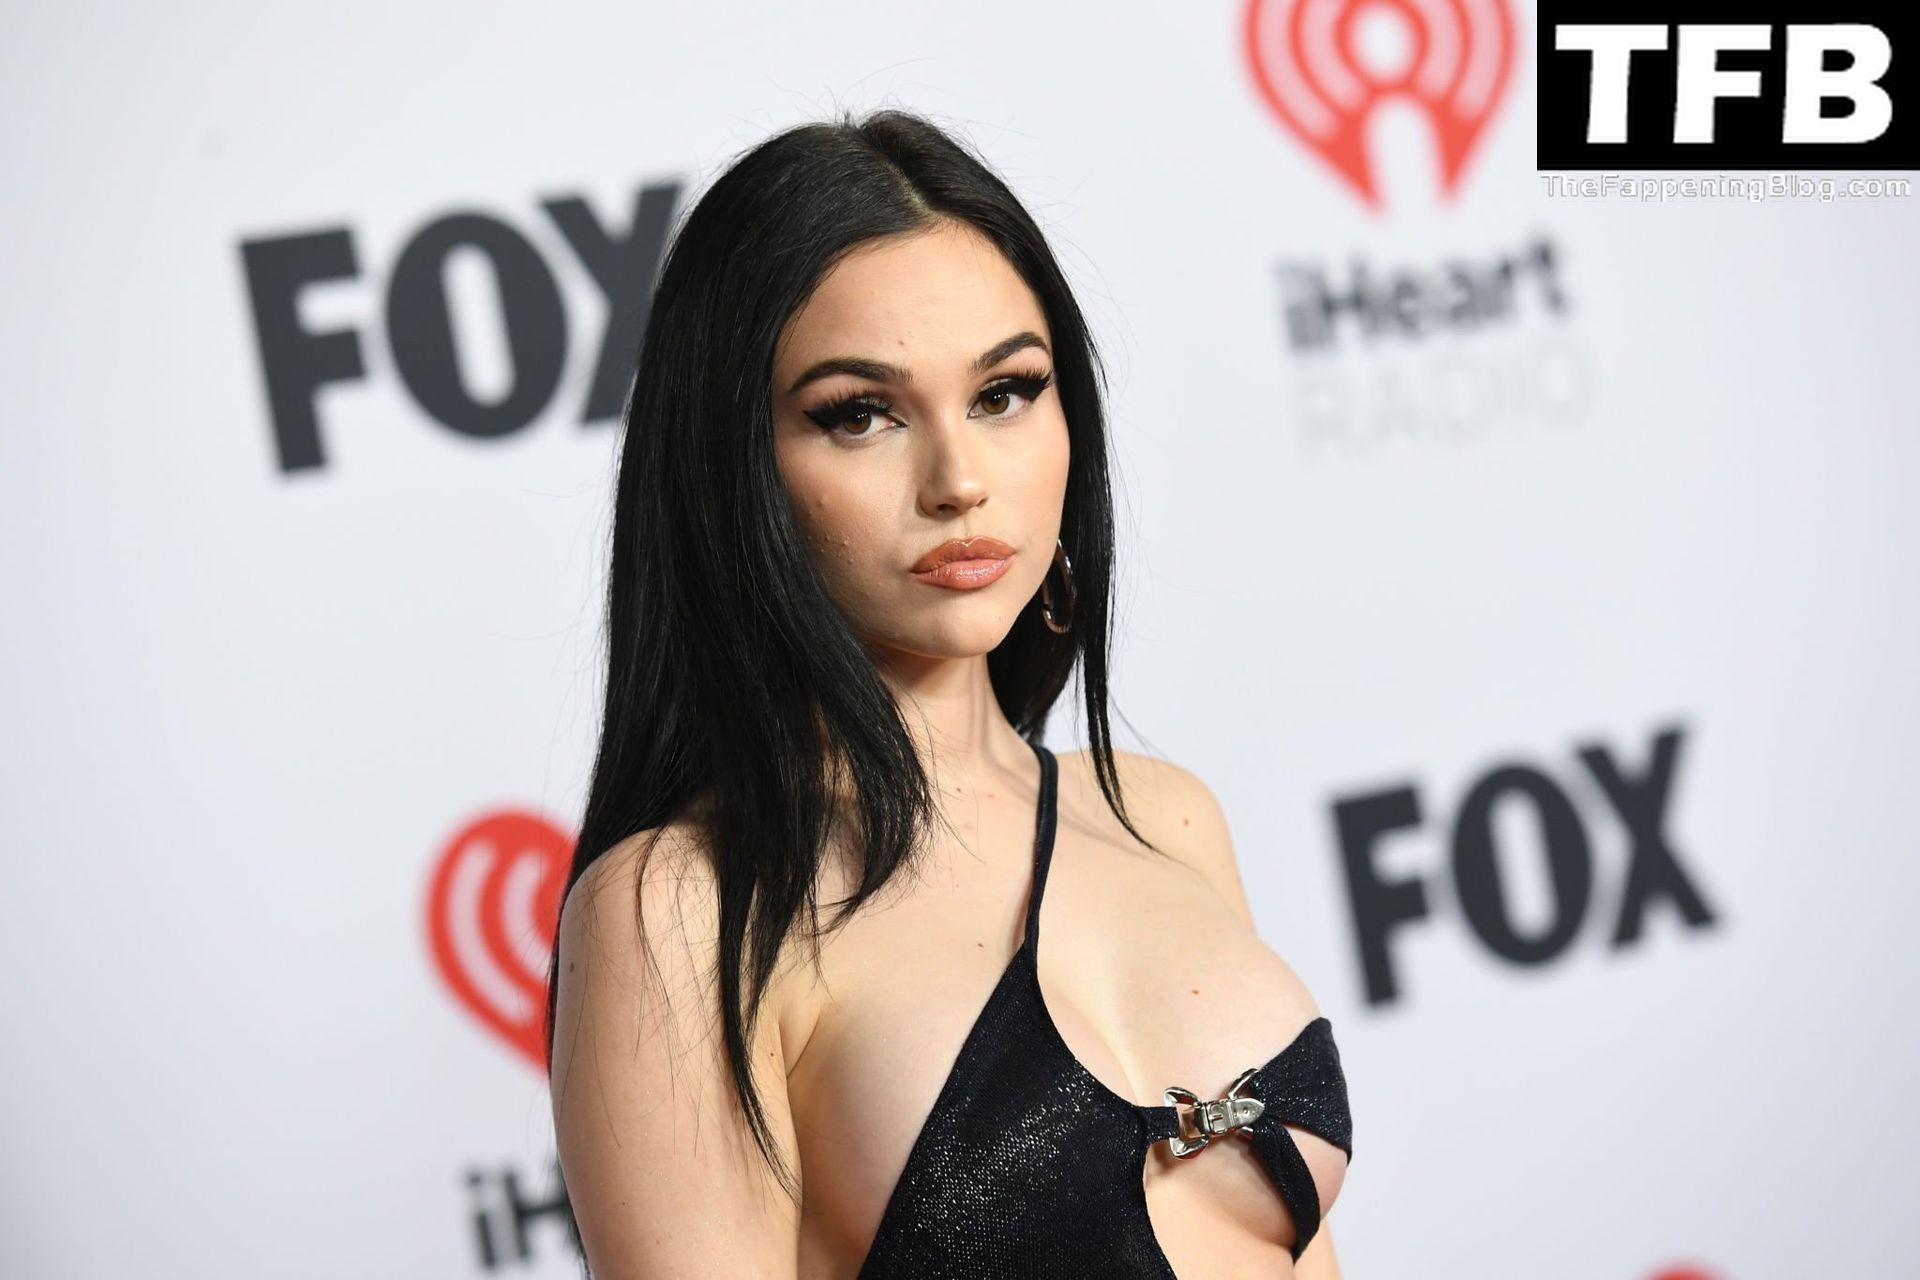 Maggie Lindemann Stuns On The Red Carpet At The Iheartradio Music